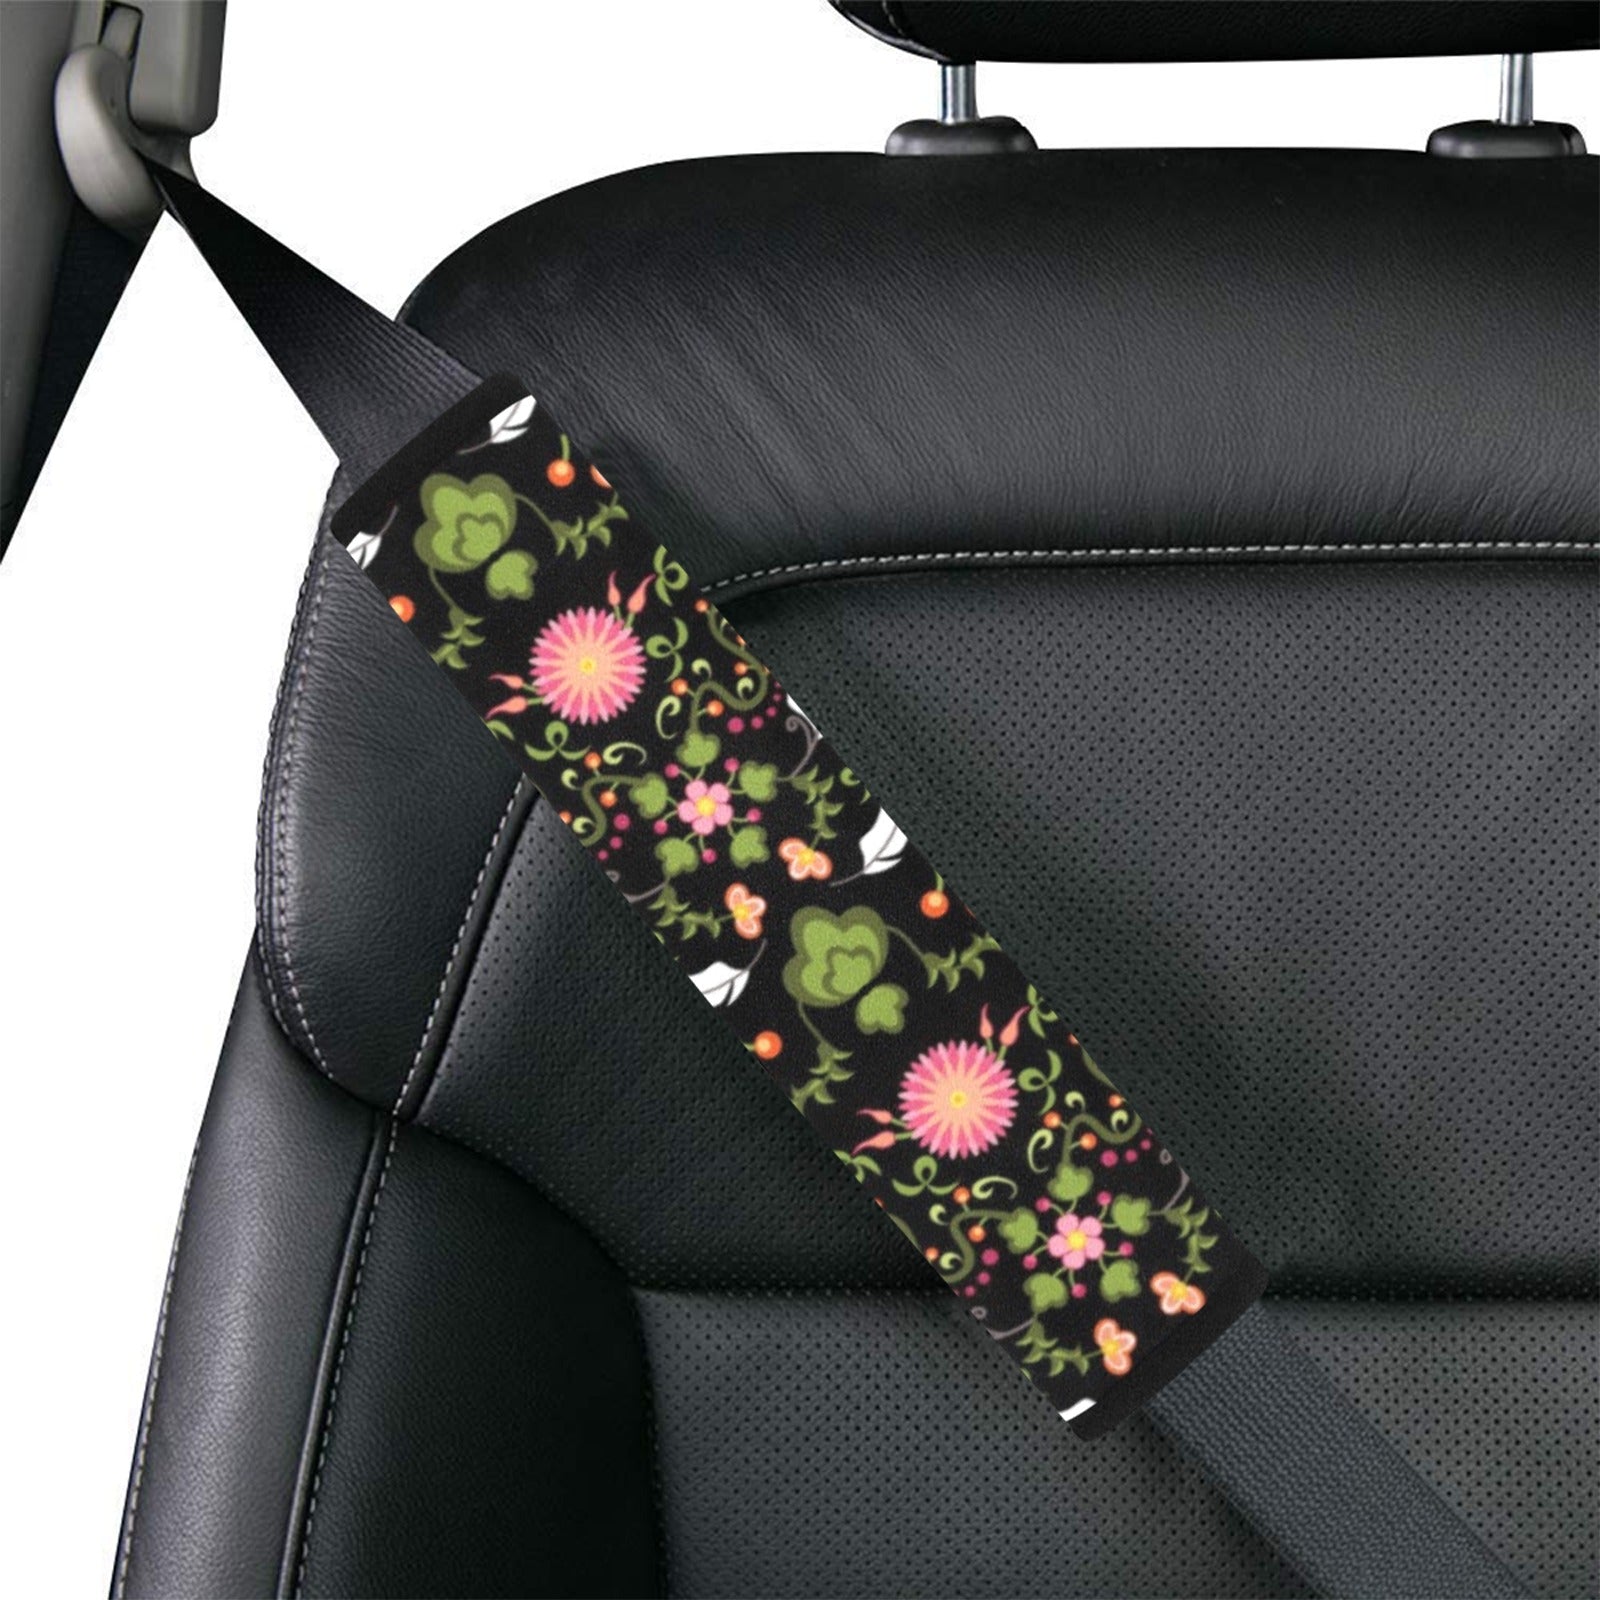 New Growth Car Seat Belt Cover 7''x12.6'' (Pack of 2)